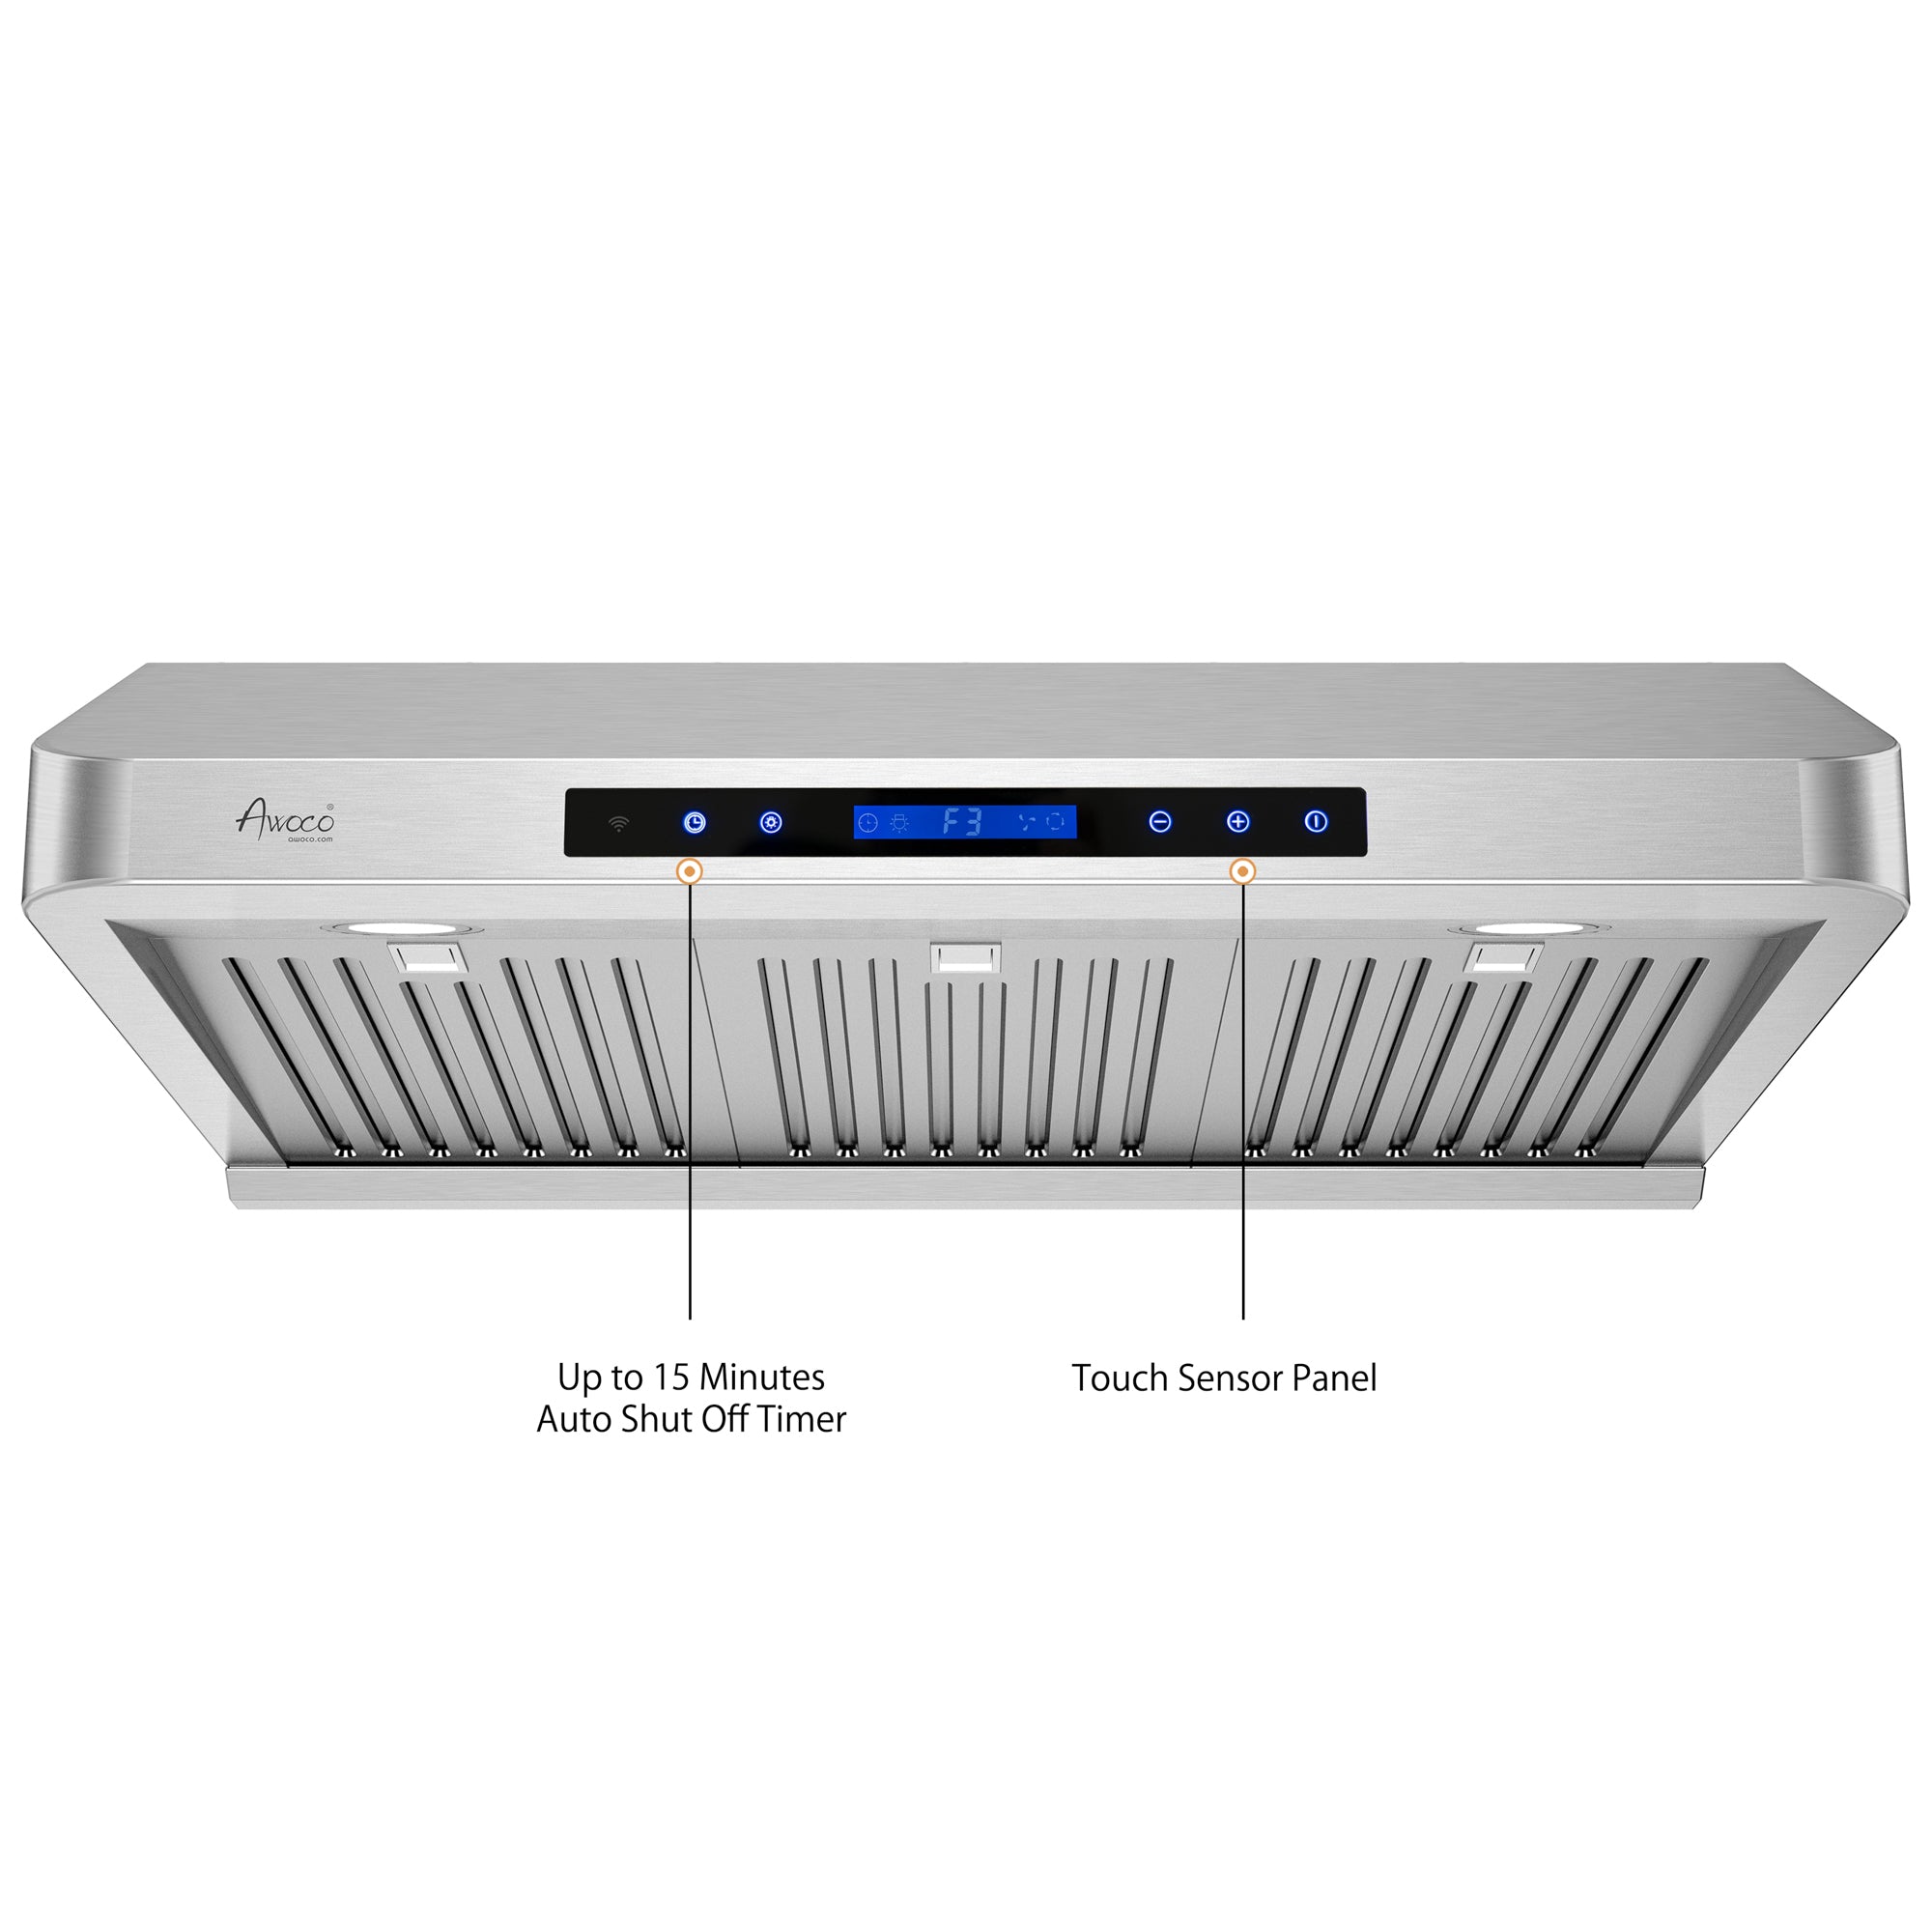 Awoco RH-S10-30S Under Cabinet Supreme 7” High Stainless Steel Range Hood, 4 Speeds, 8” Round Top Vent, 1000CFM, with Remote Control